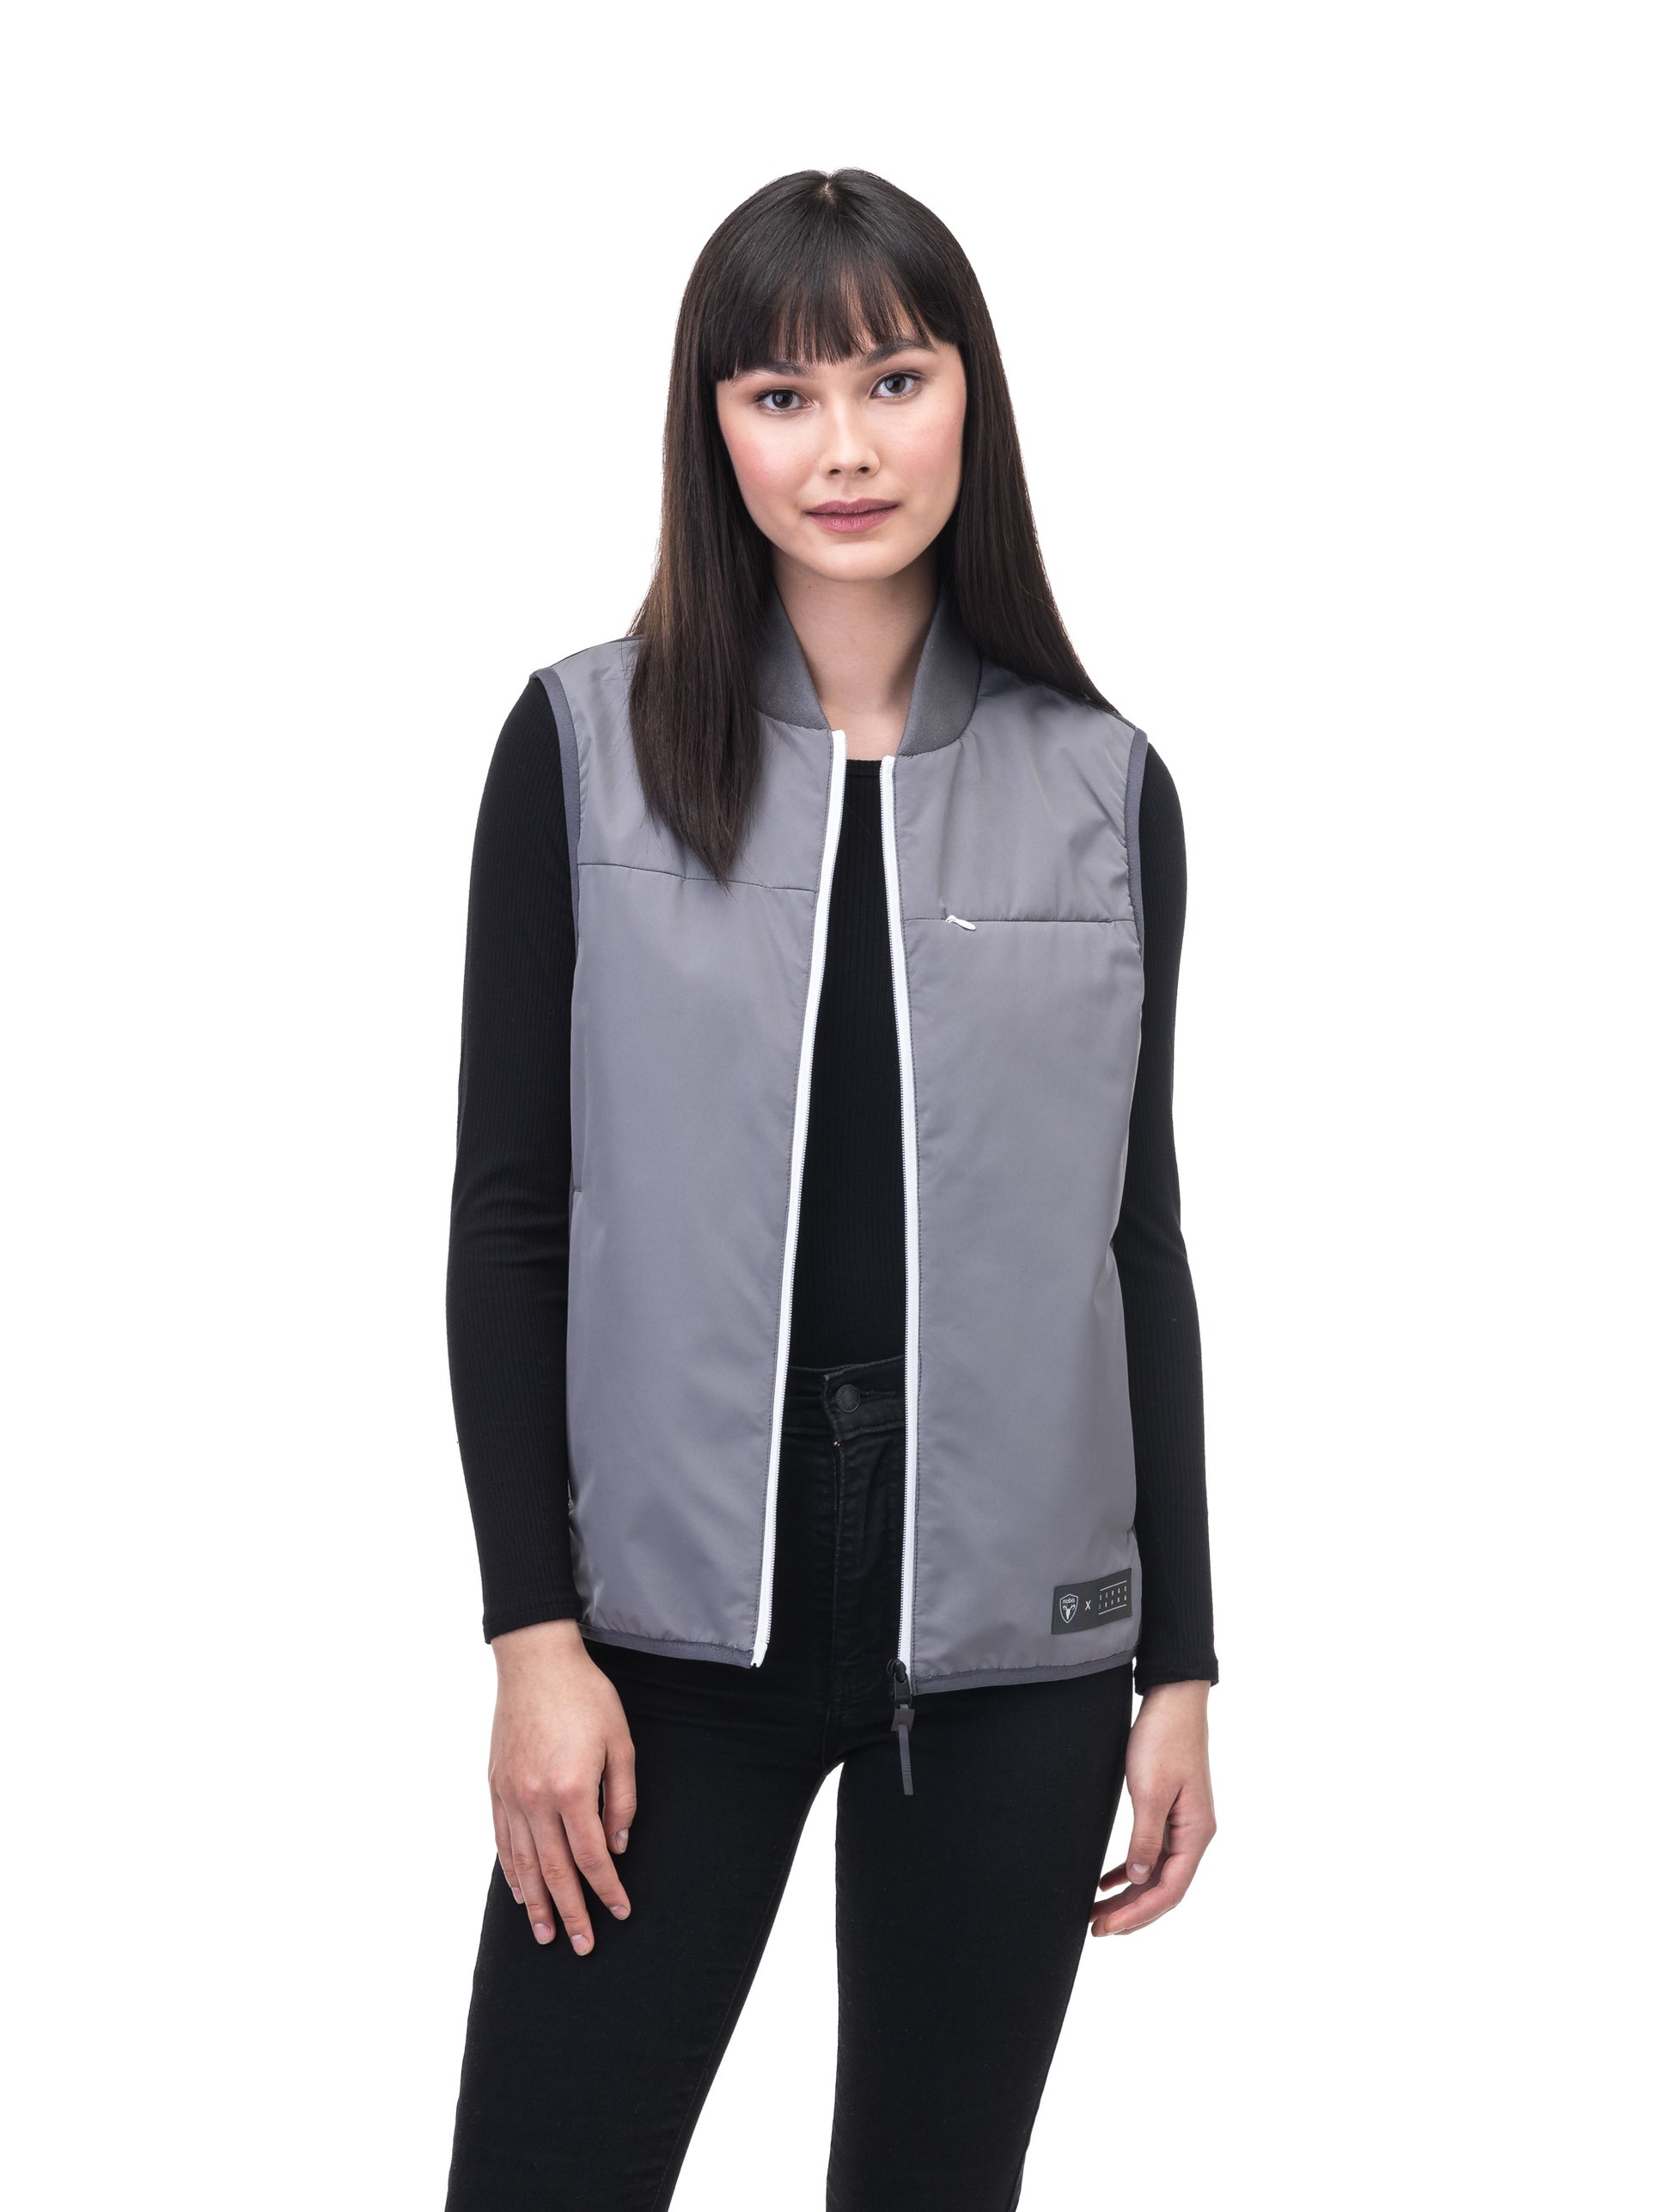 Unisex hip length vest with a contrast colour back panel, and hidden zipper pockets at waist, and an invisible zipper pocket at chest, in Concrete/Steel Grey